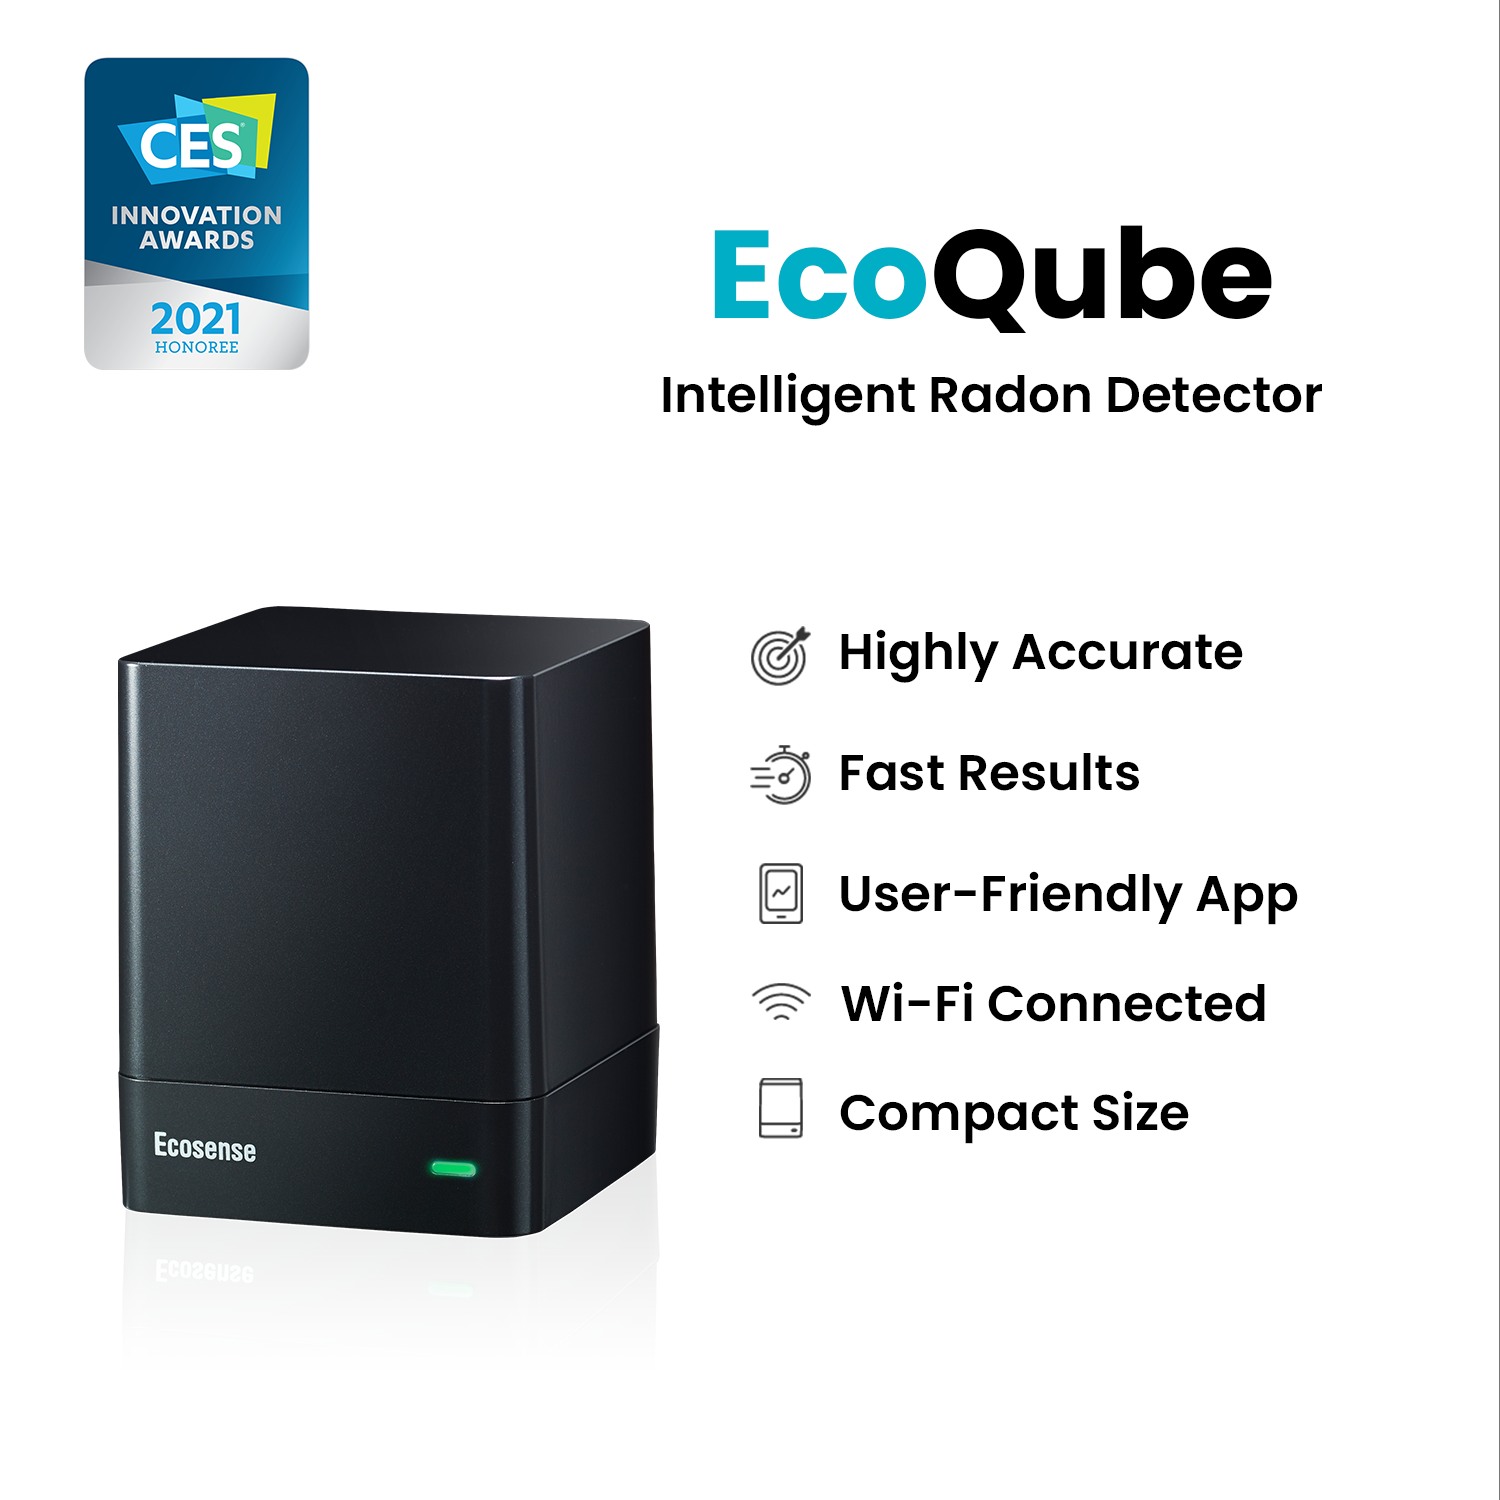 Ecosense’s EcoQube Named to TIME’s List of the 100 Best Inventions of 2021